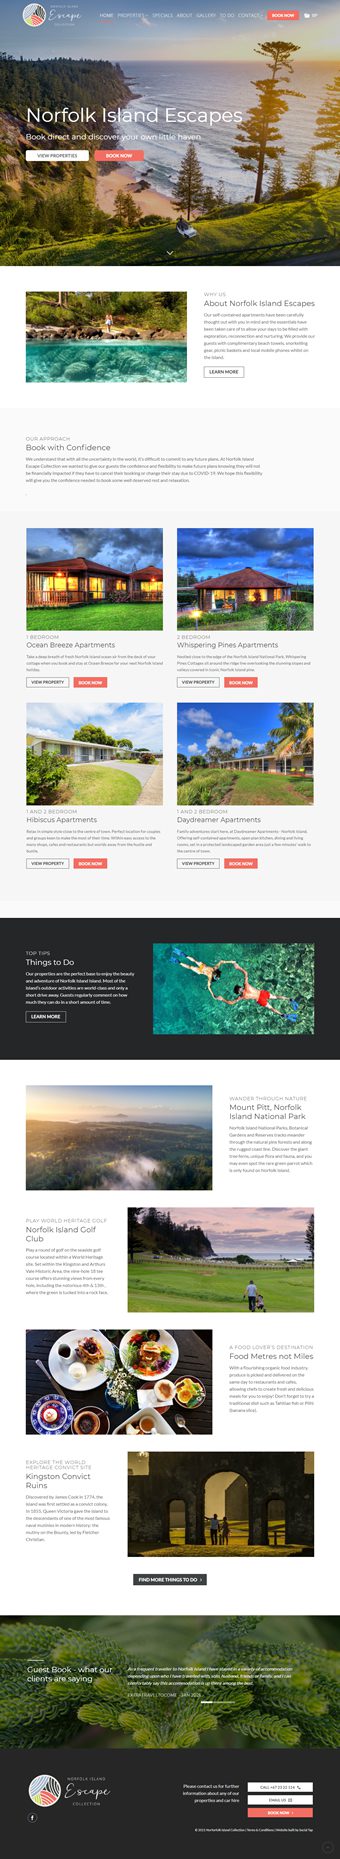 Our Work Hospitality Tourism Website Design Norfolk Island Collective